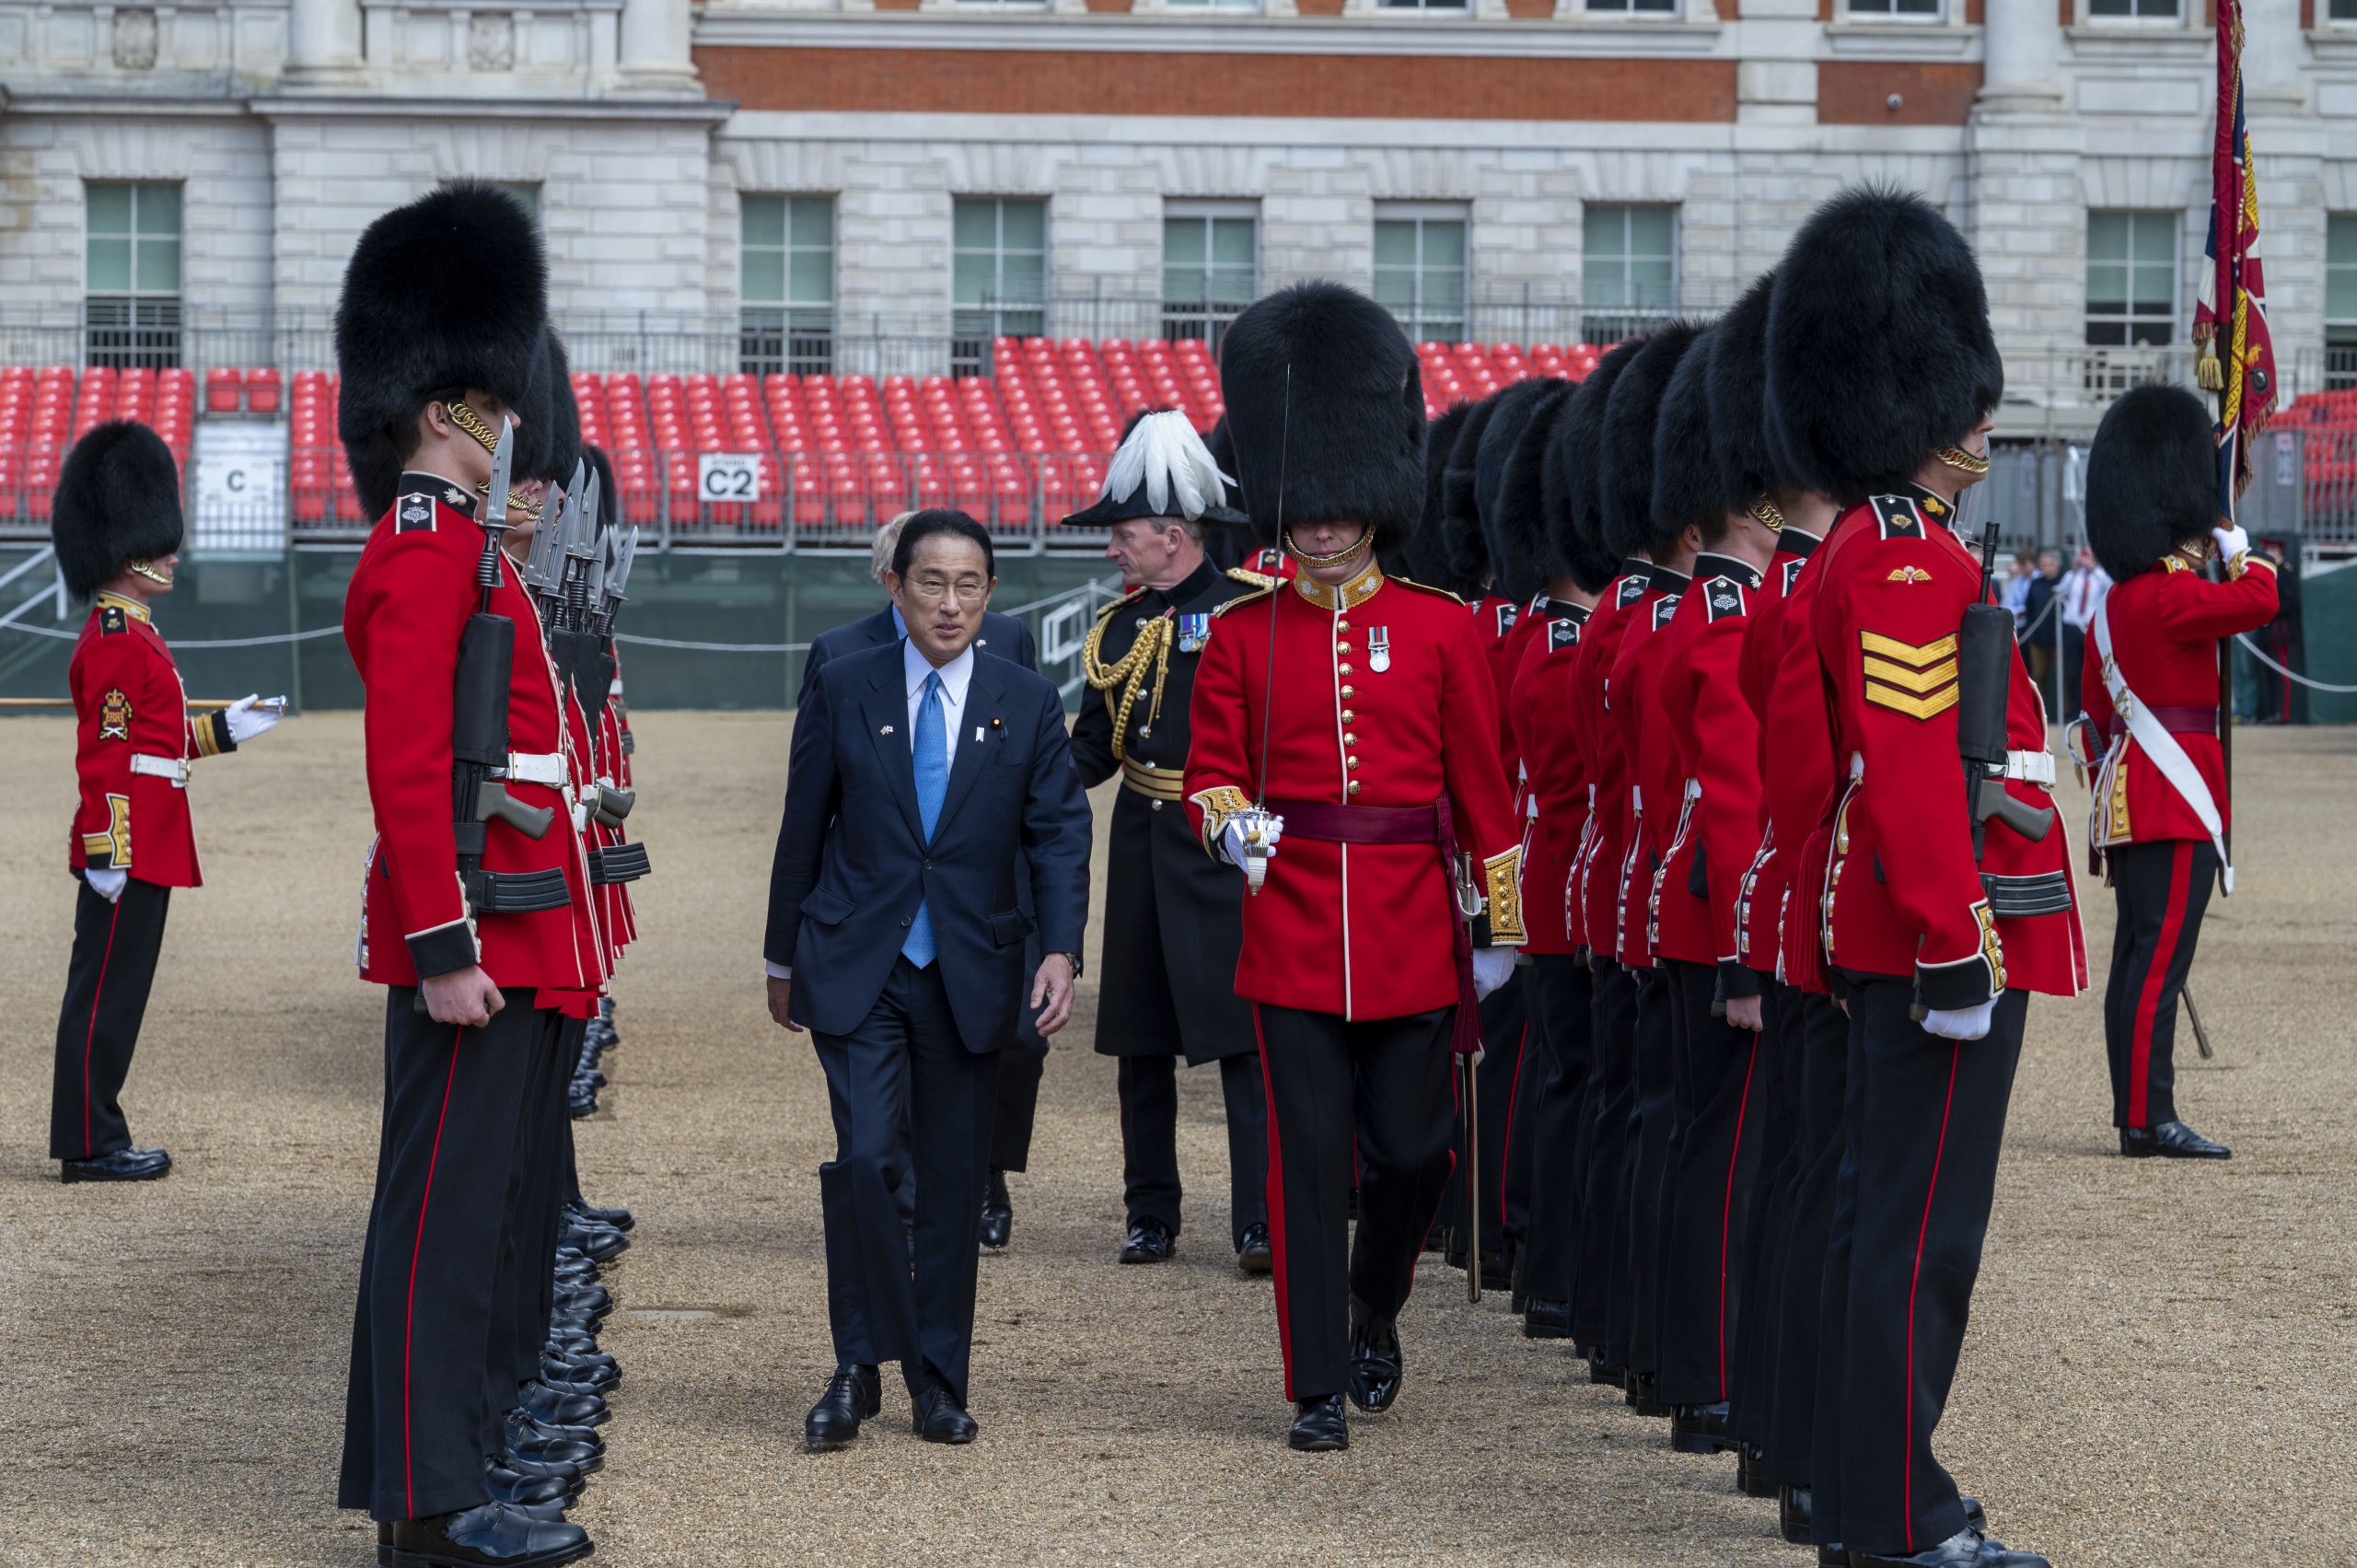 Guard Of Honour For Prime Minister Of Japan